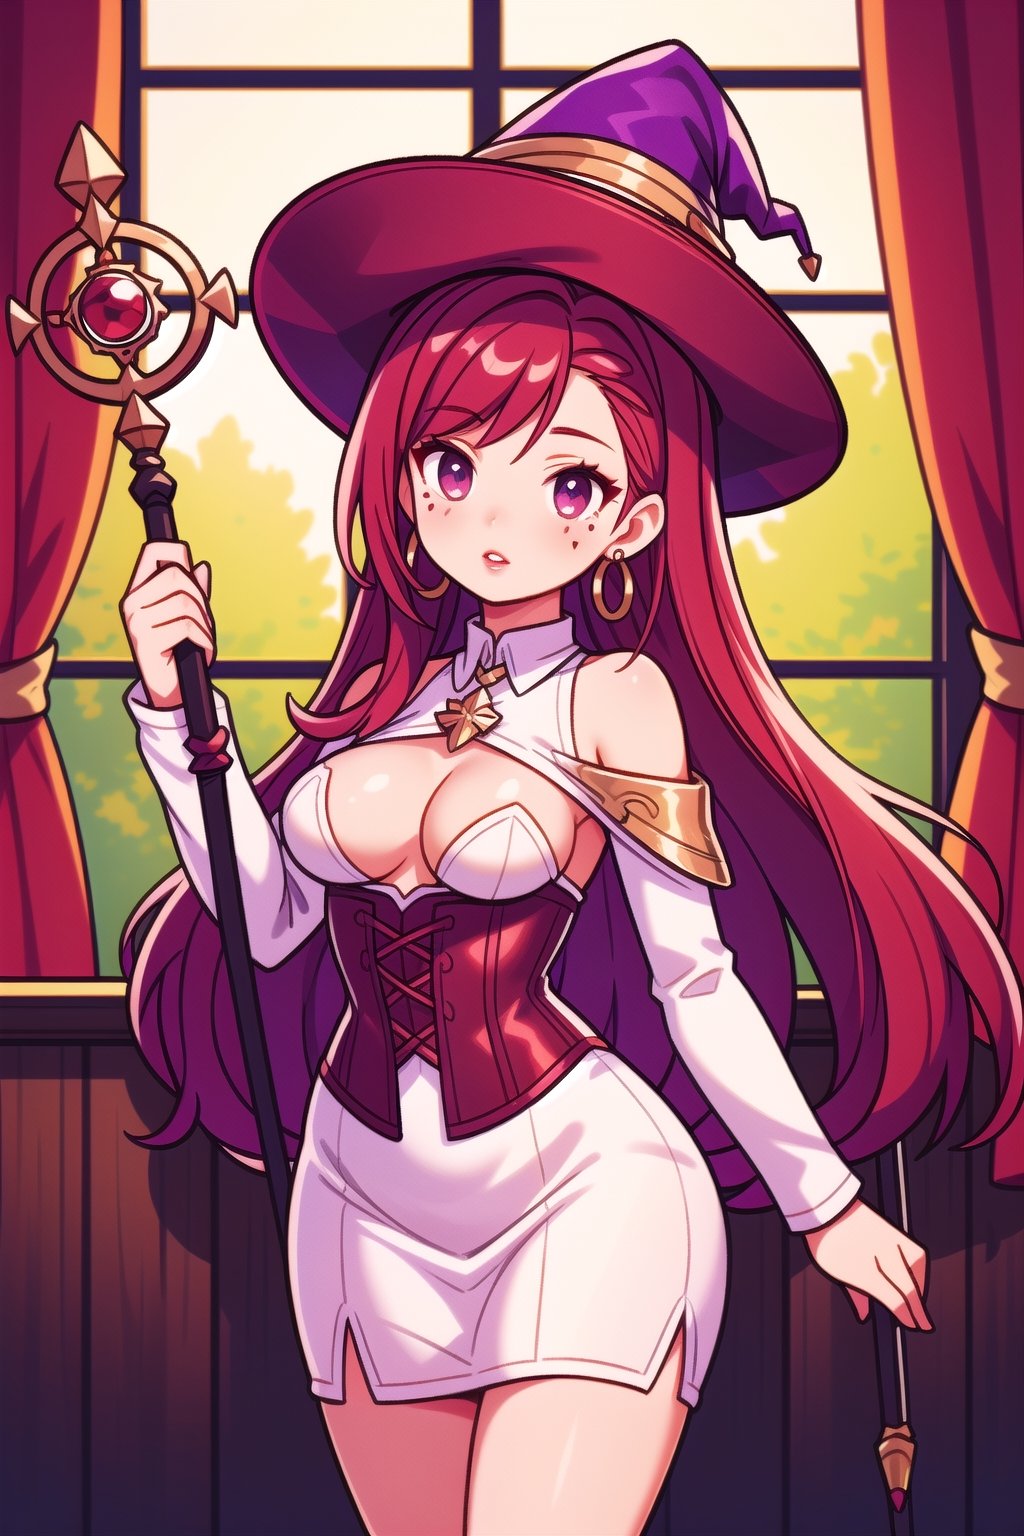 Mature female, long ginger hair, extremely long hair, beauty mark, burgundy eyes, earrings, medium breasts, boob window, exposed shoulders, burgundy lips, long legs

Burgundy Witches hat, white feather on hat, long white pencil dress, full length white pencil dress, burgundy top, burgundy corset, white collar, gold arm brazers, magic staff